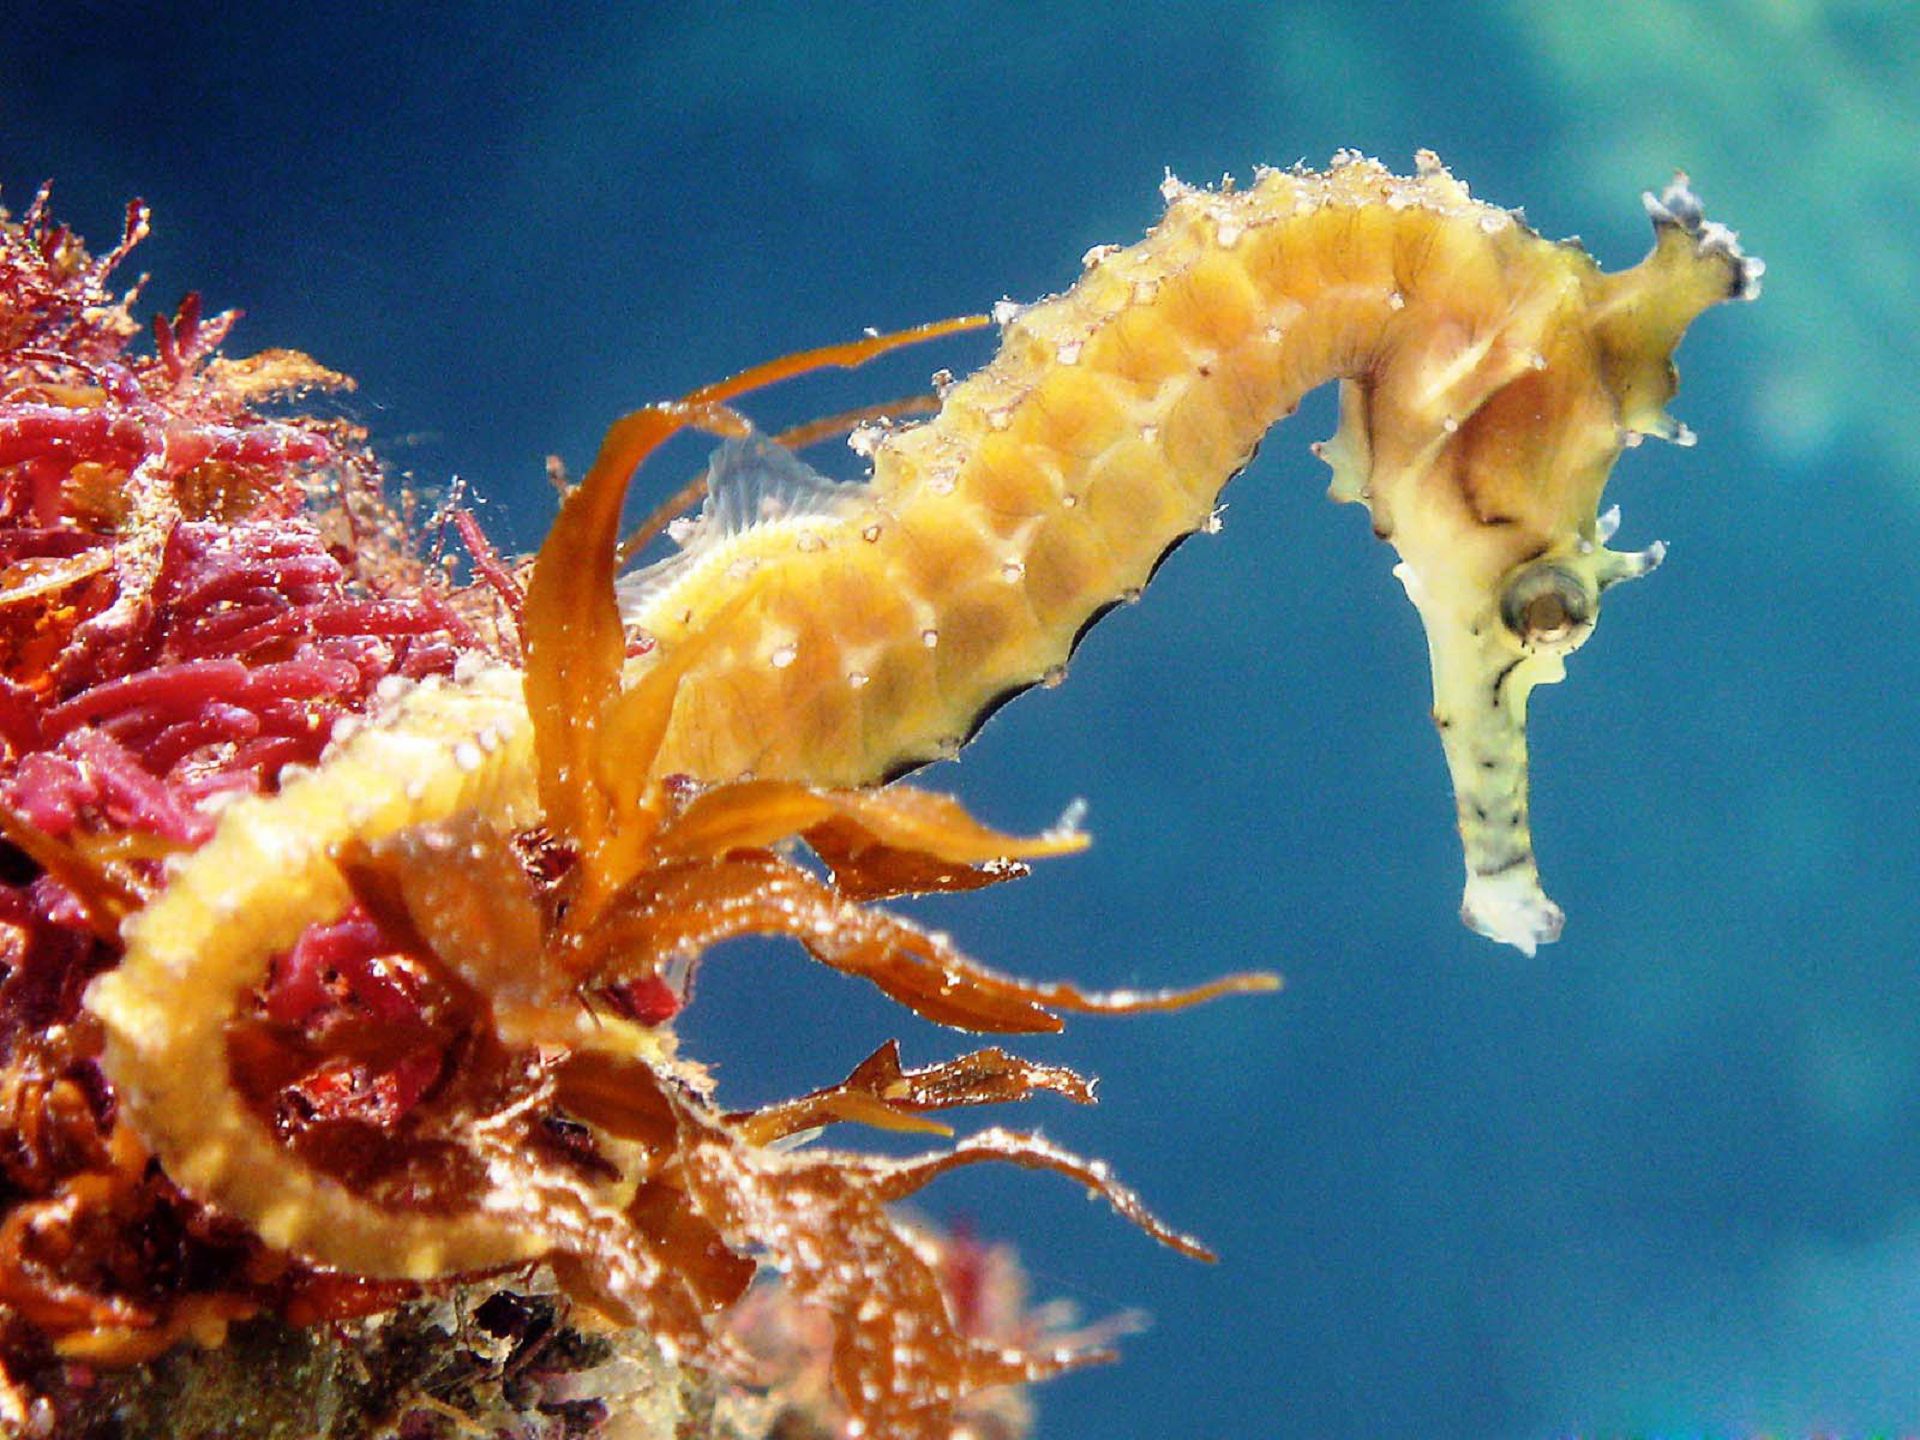 19 Seahorse Facts for Kids That Will Amaze You – Facts For Kids